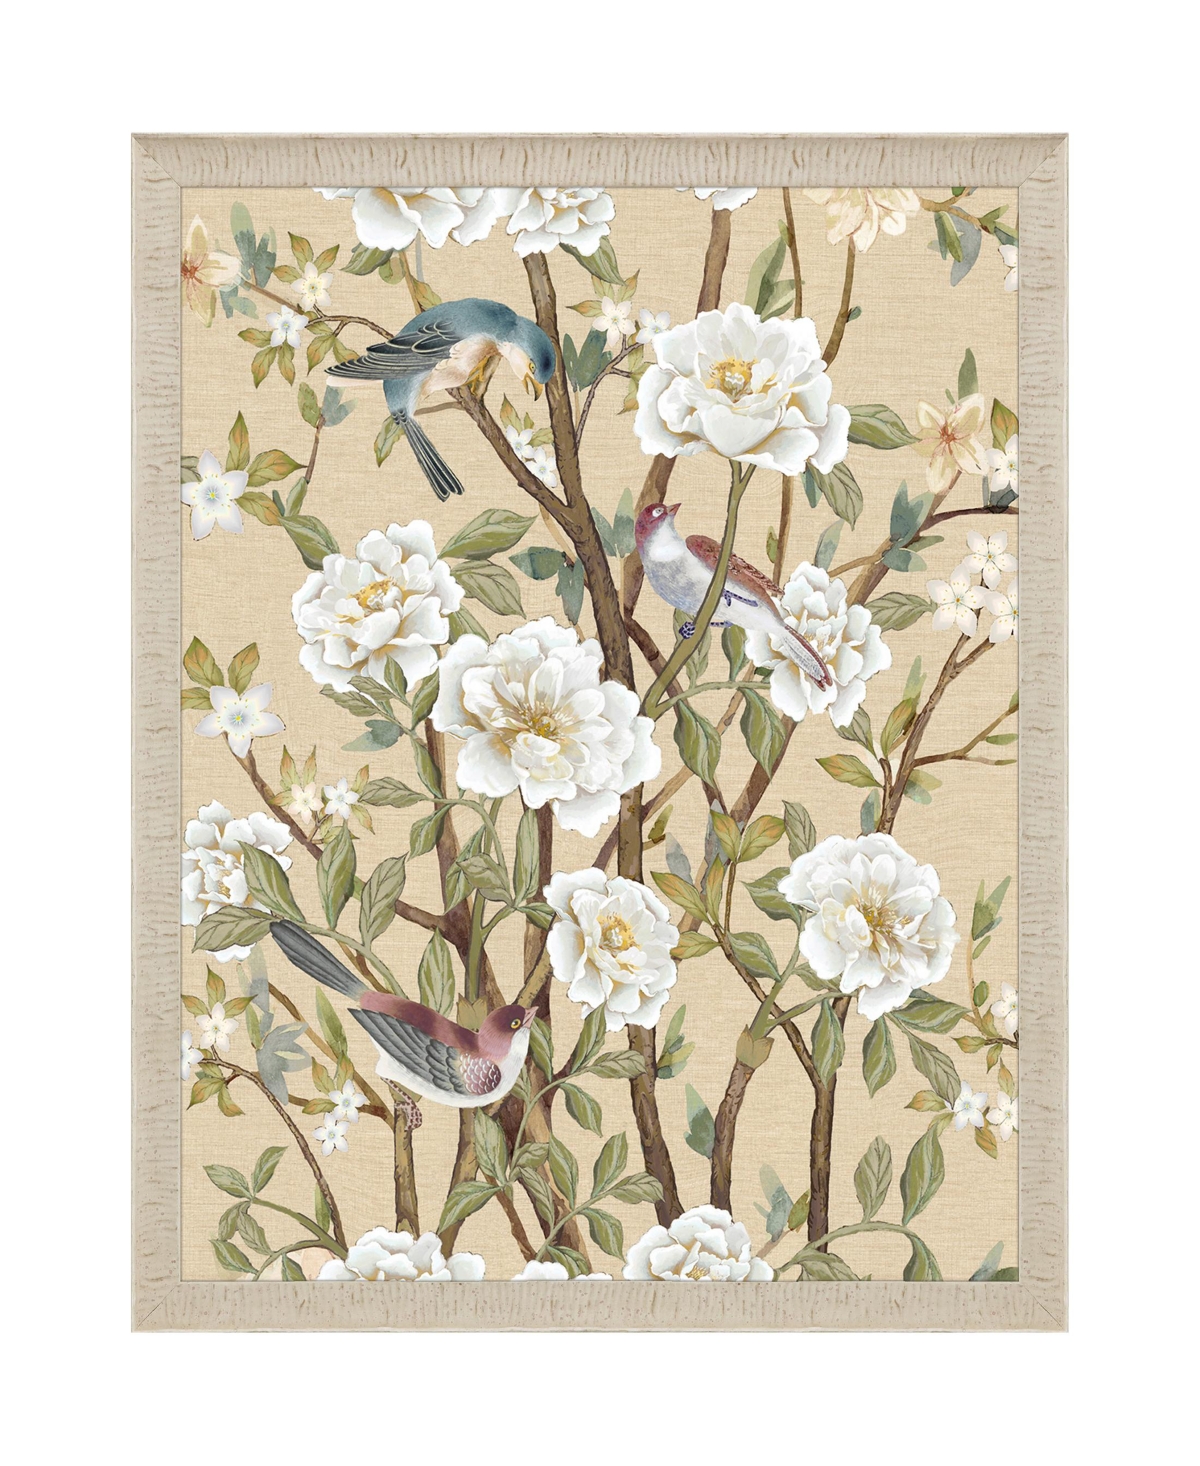 Paragon Picture Gallery Peony Flock Framed Art In White